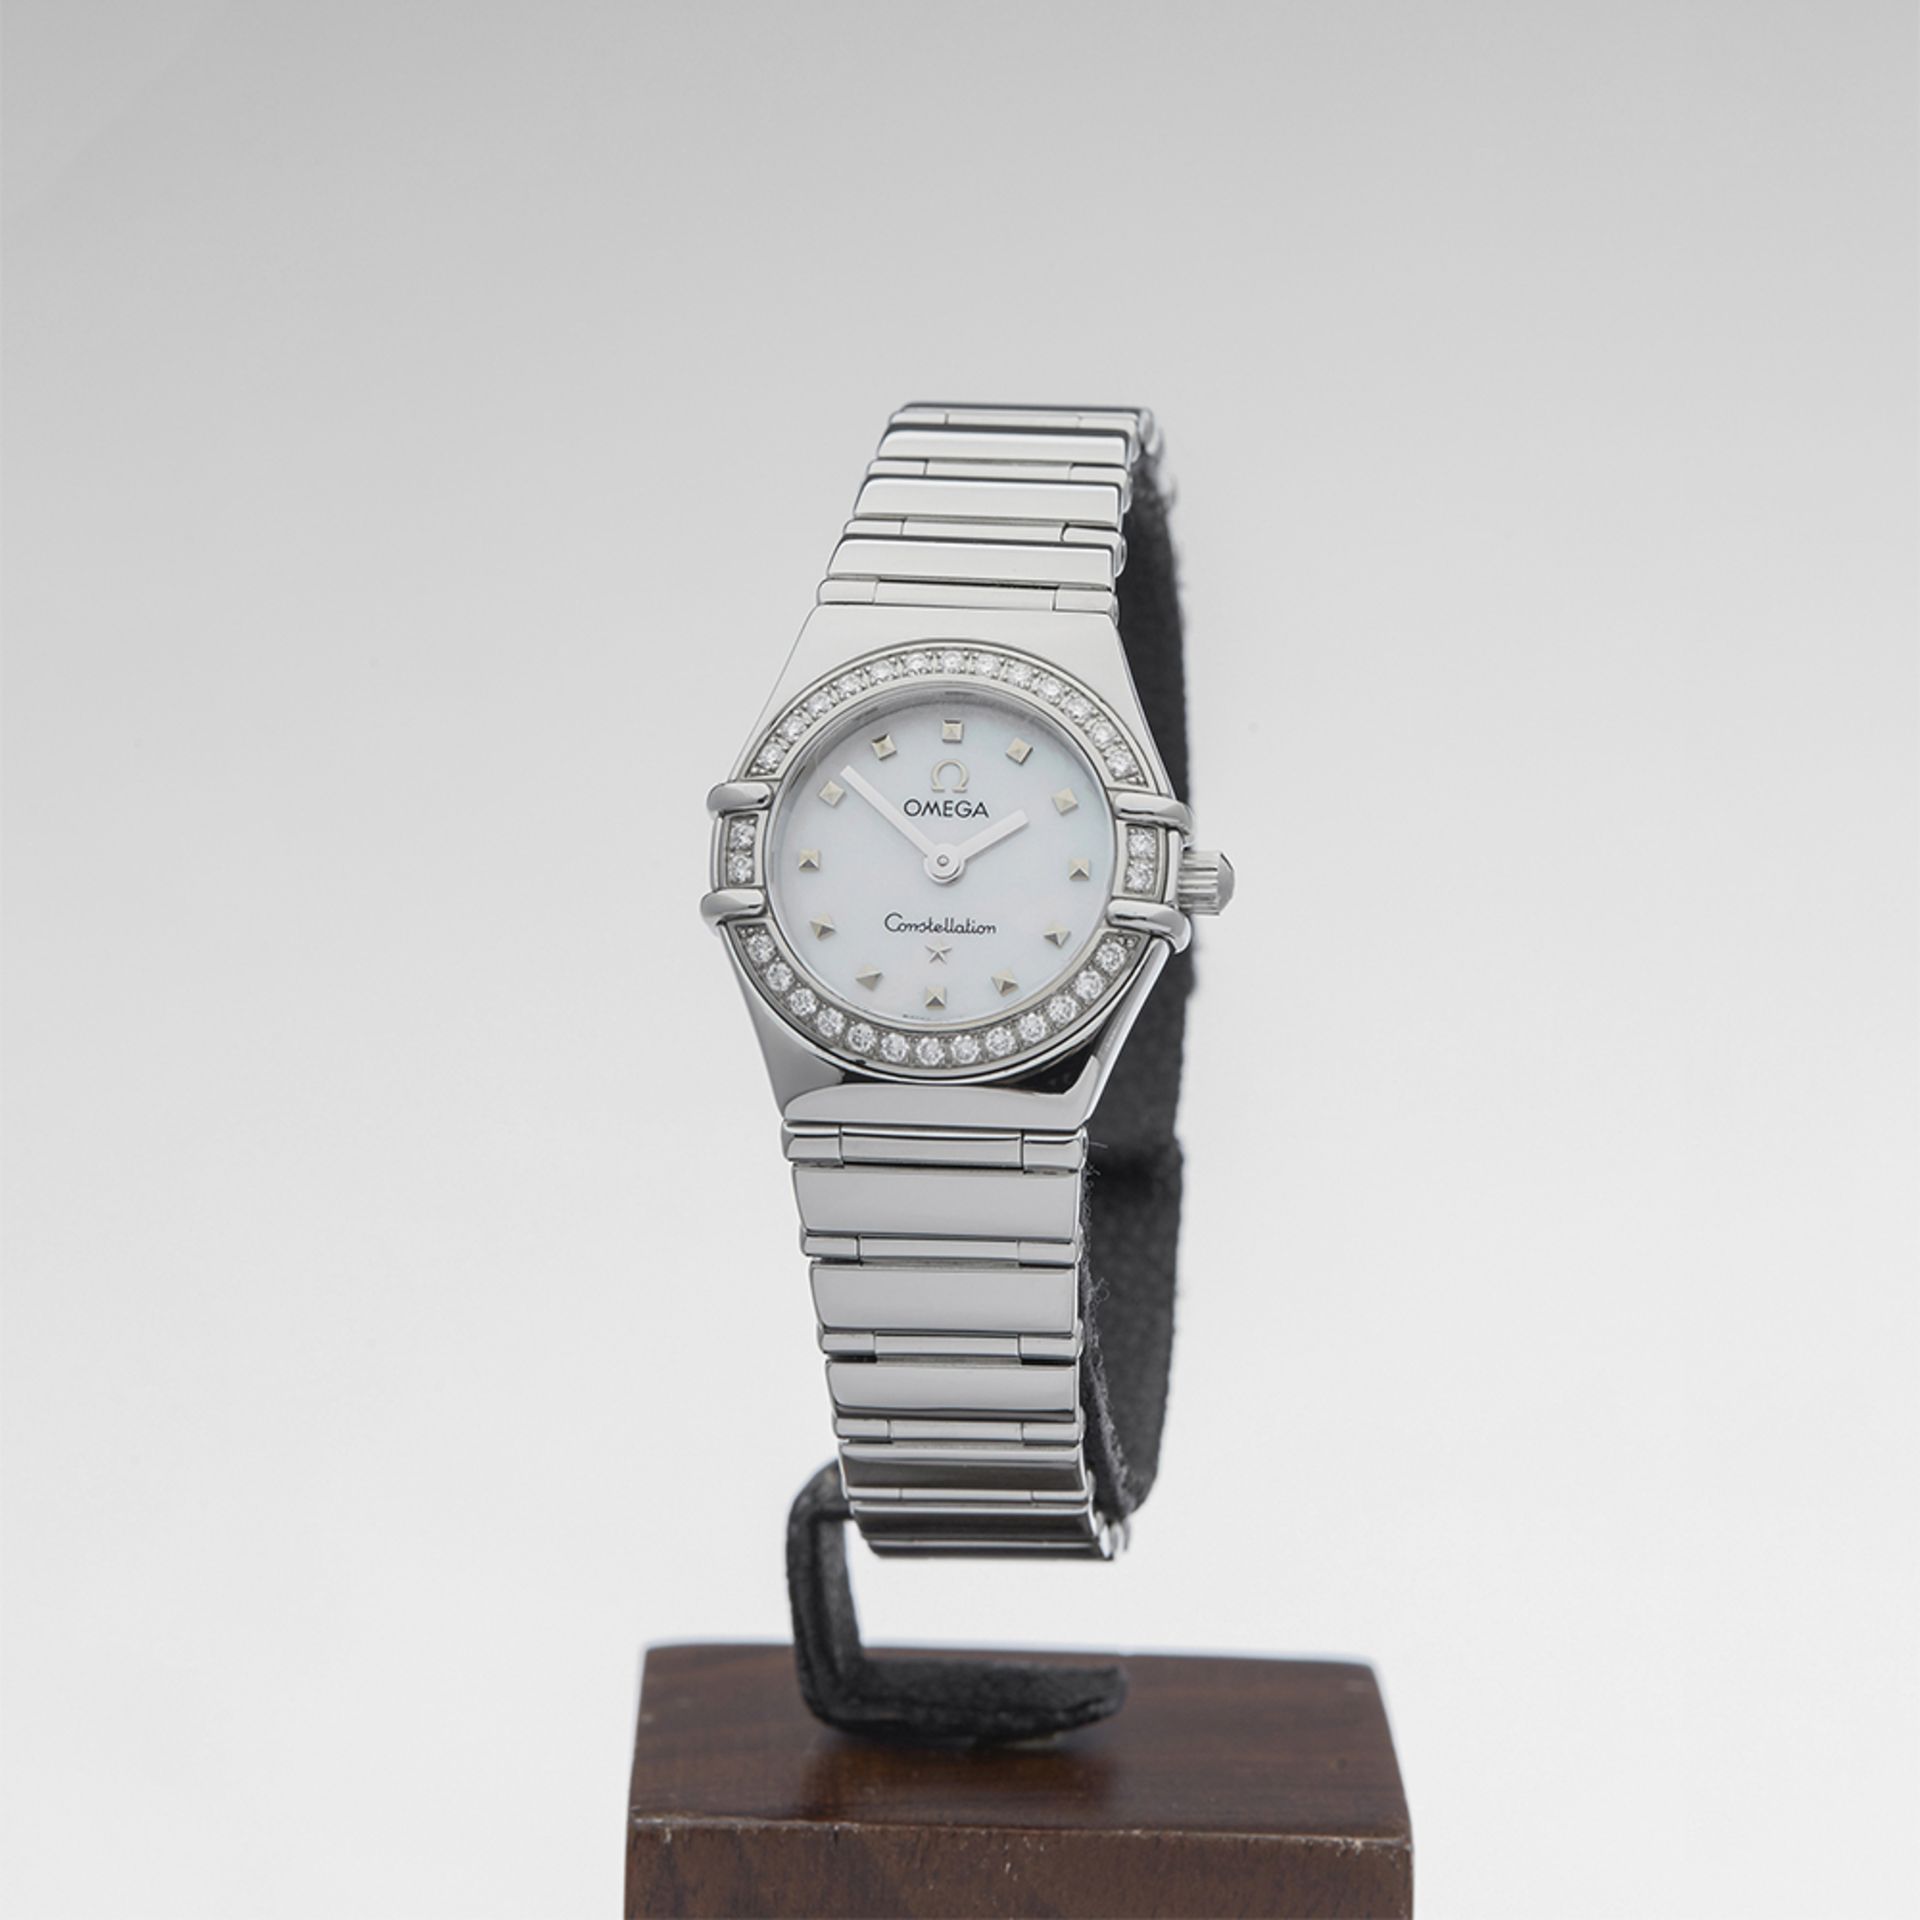 Omega, Constellation 22mm Stainless Steel 1466.71.00 - Image 3 of 9